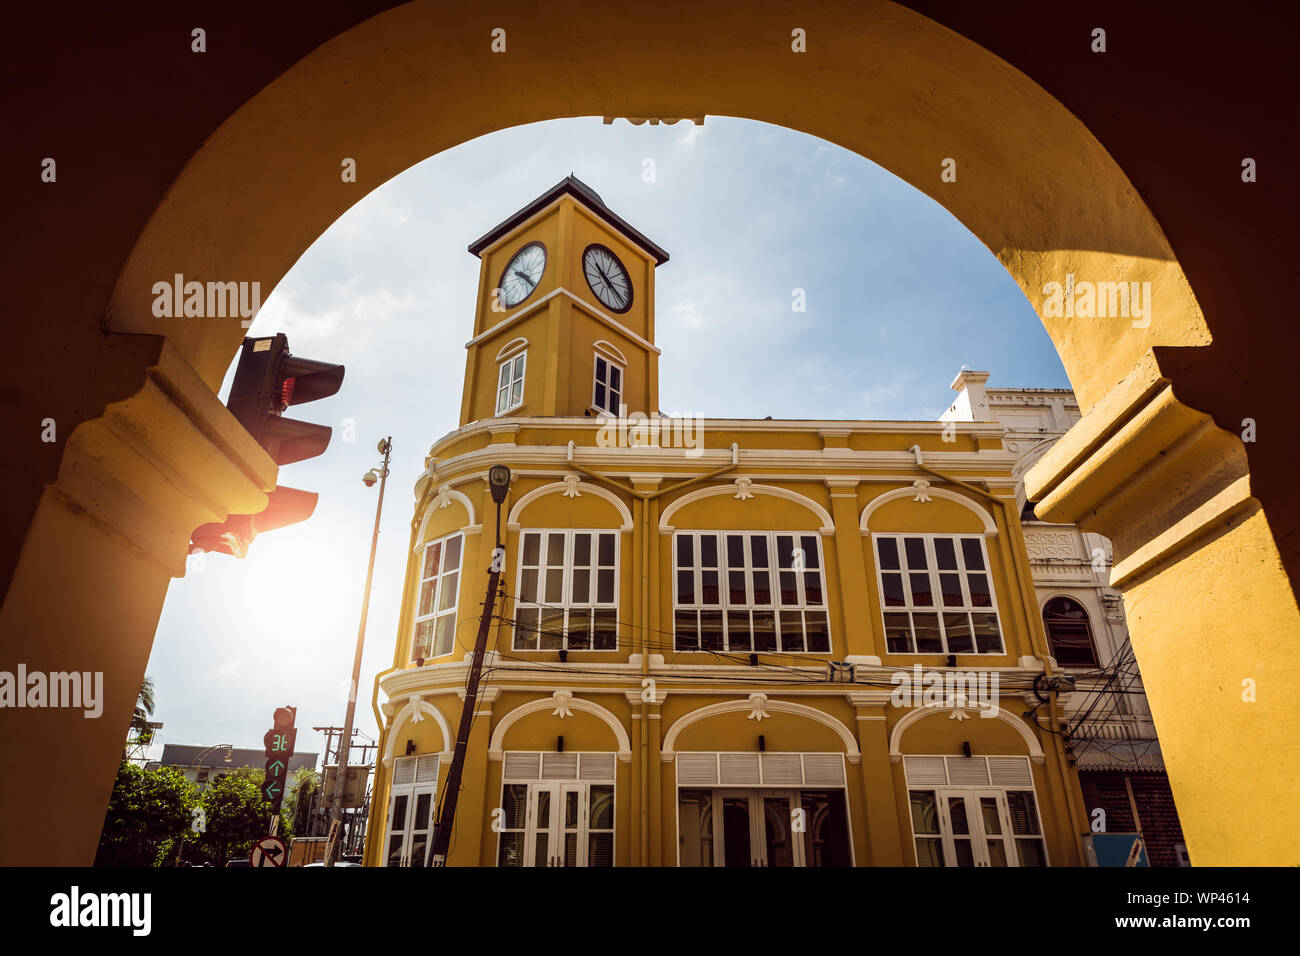 Restored chino-Portuguese clock tower in phuket old town, Thailand. Stock Photo